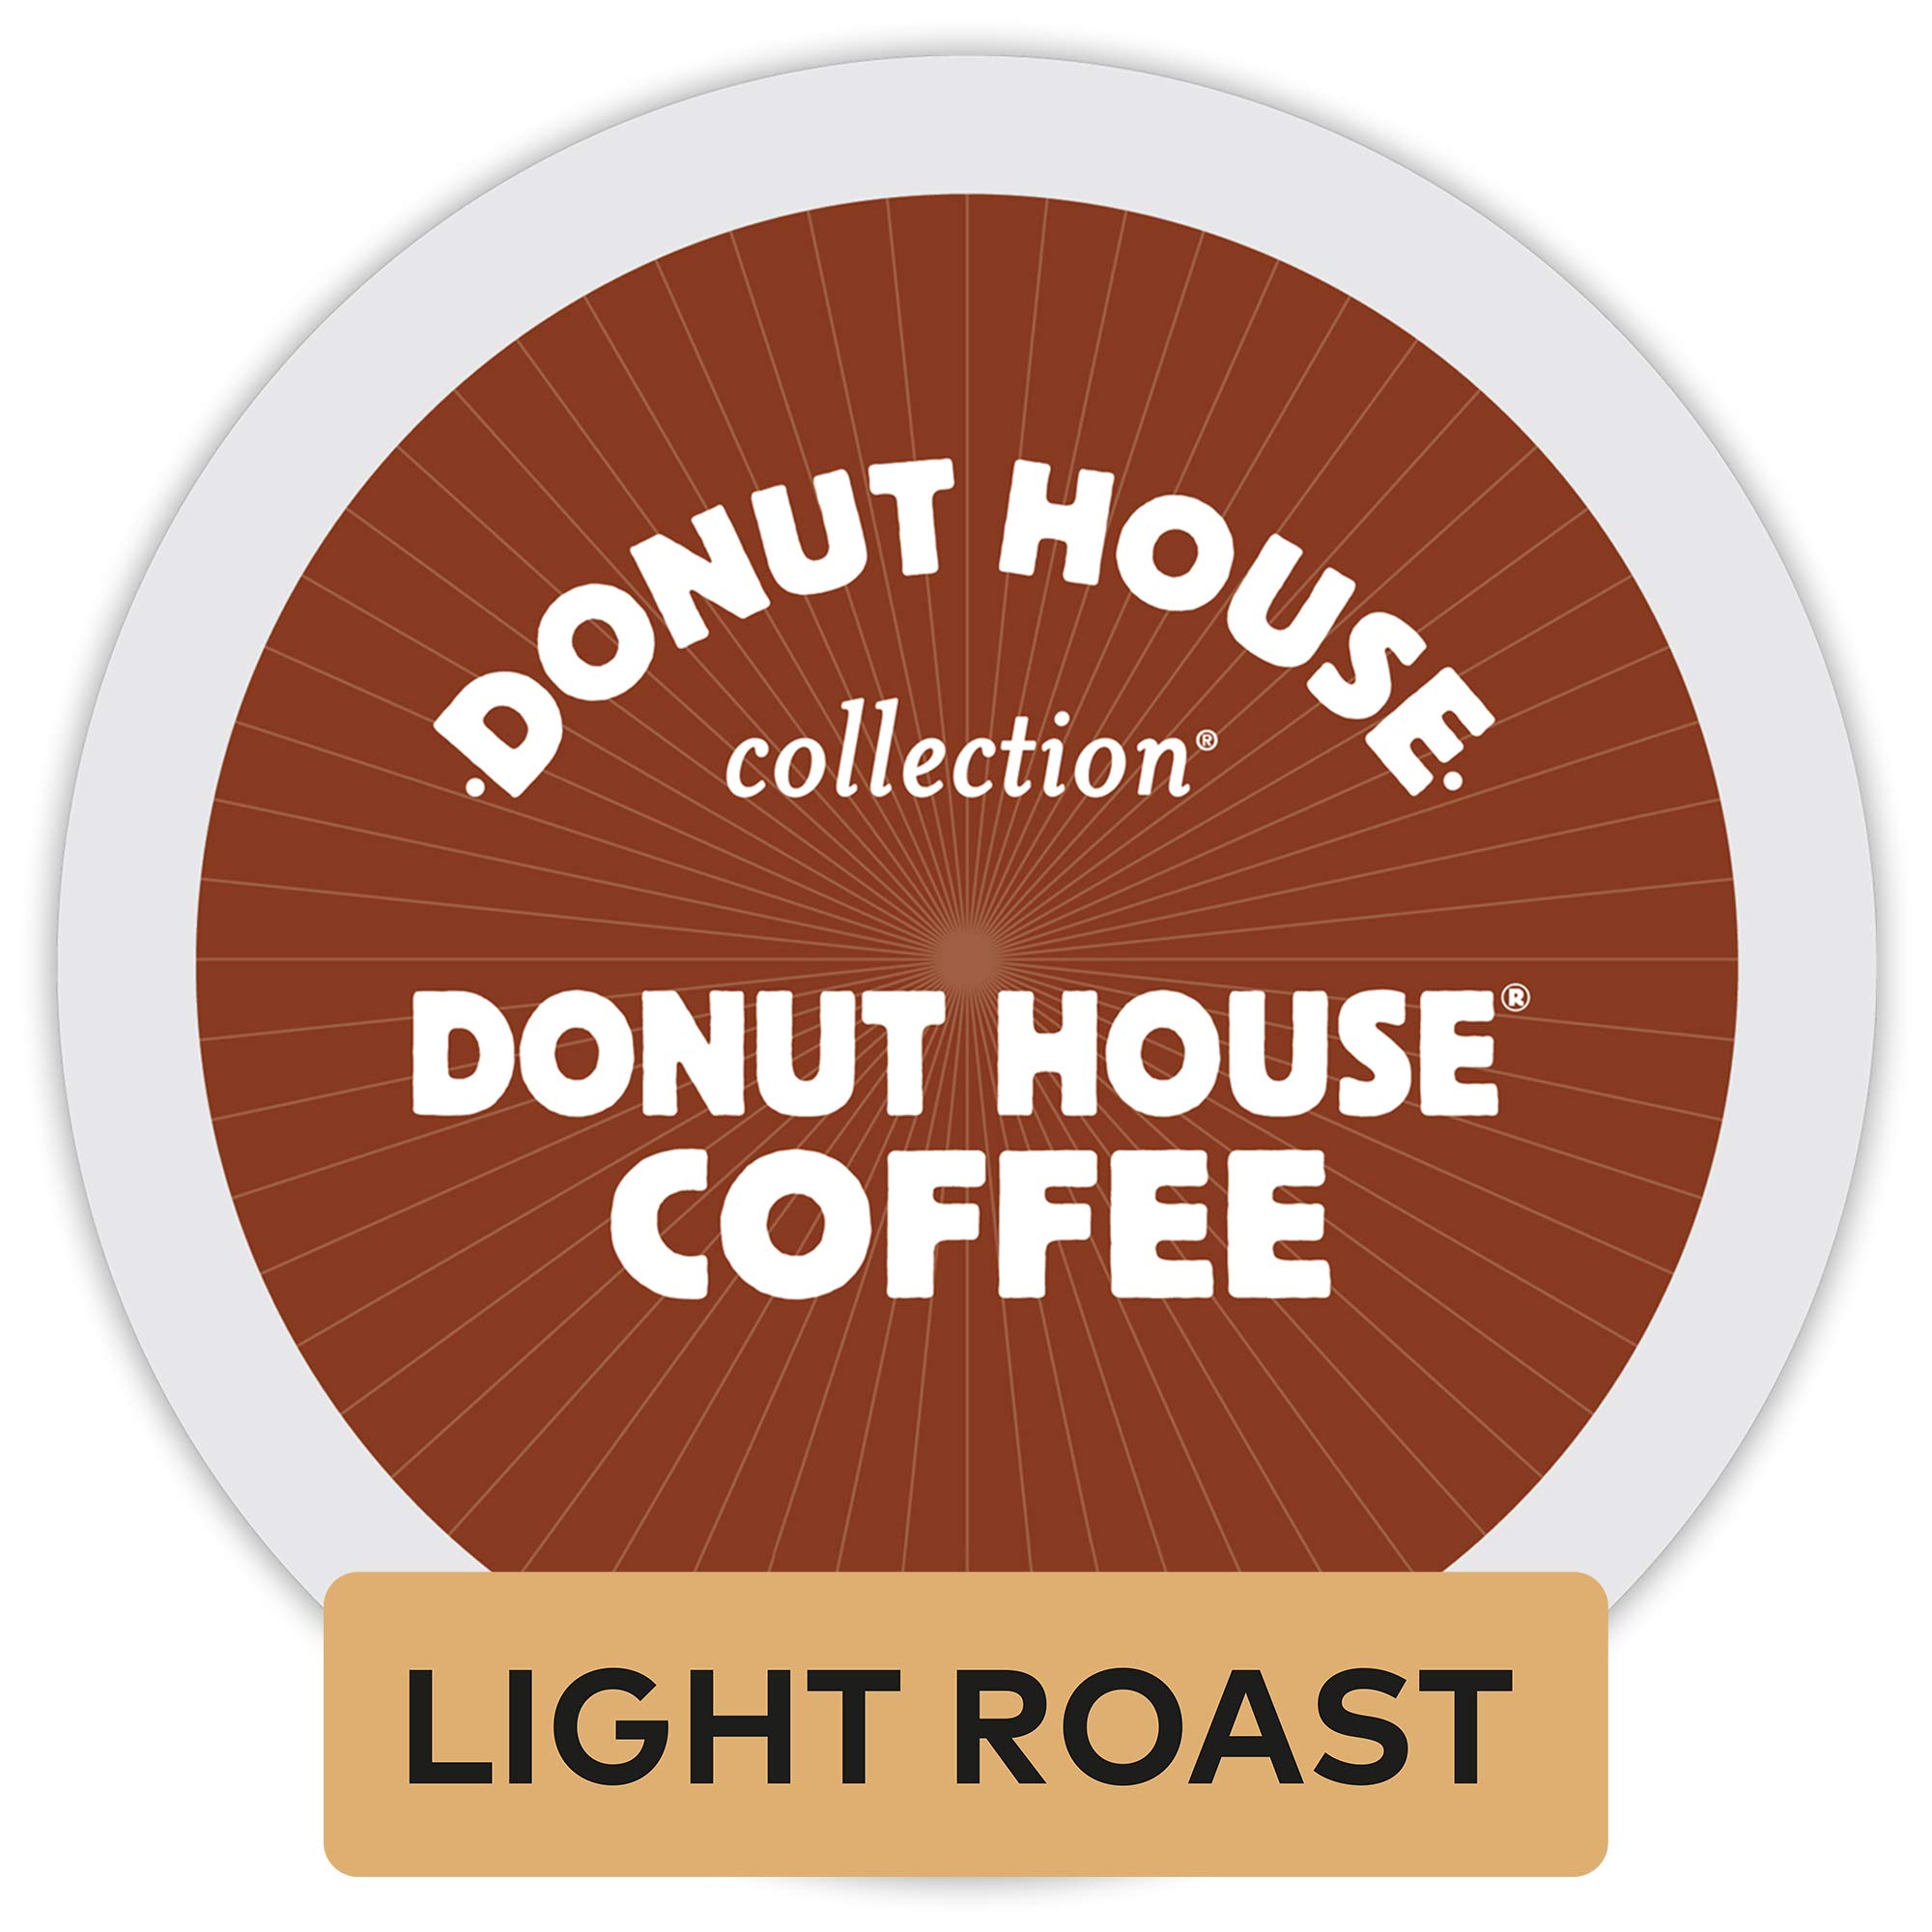 Donut House Collection Donut House Coffee, Single-Serve Keurig K-Cup Pods, Light Roast Coffee, 12 count (Pack of 6)